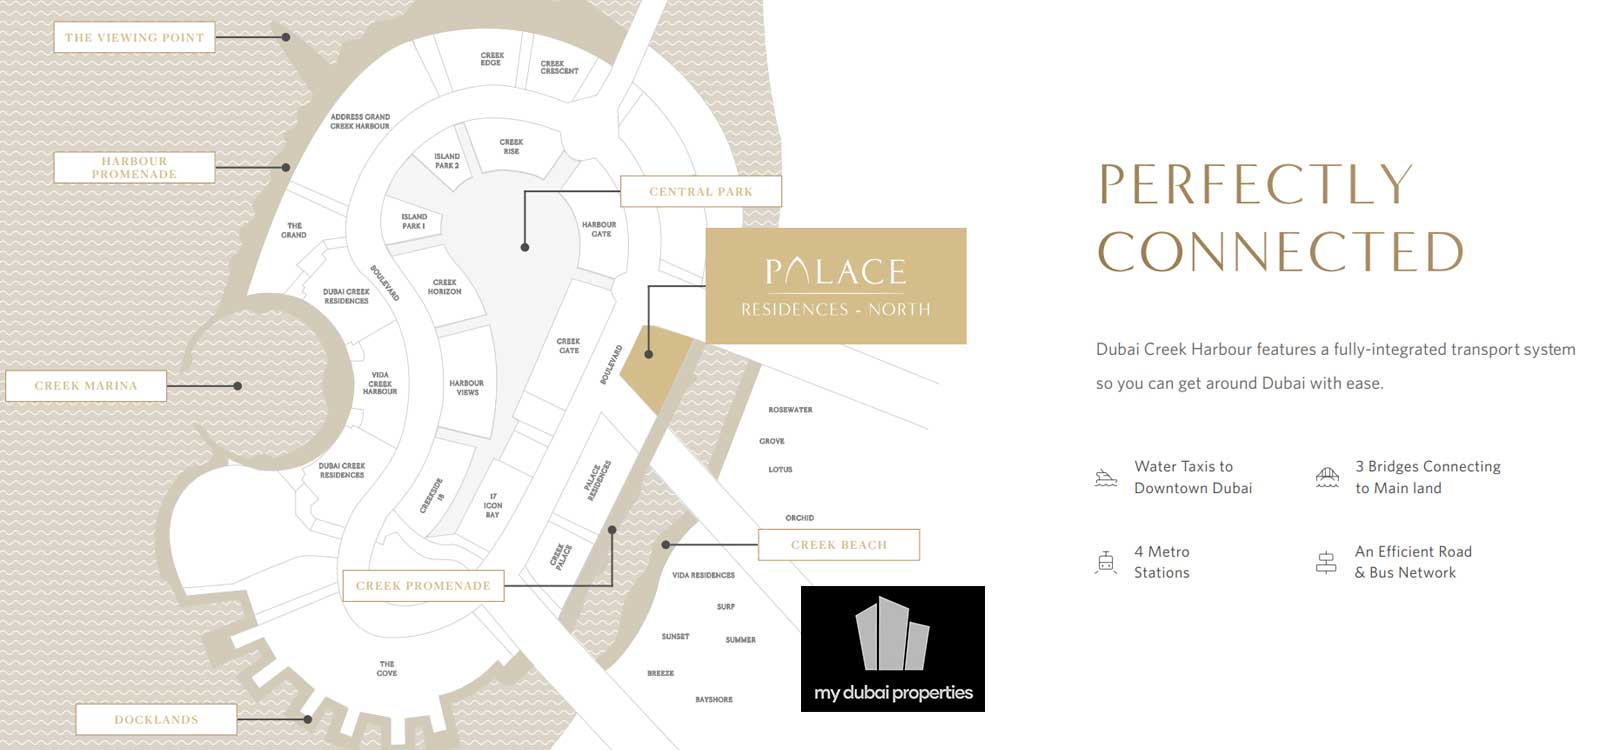 Palace Residences North Connectivity